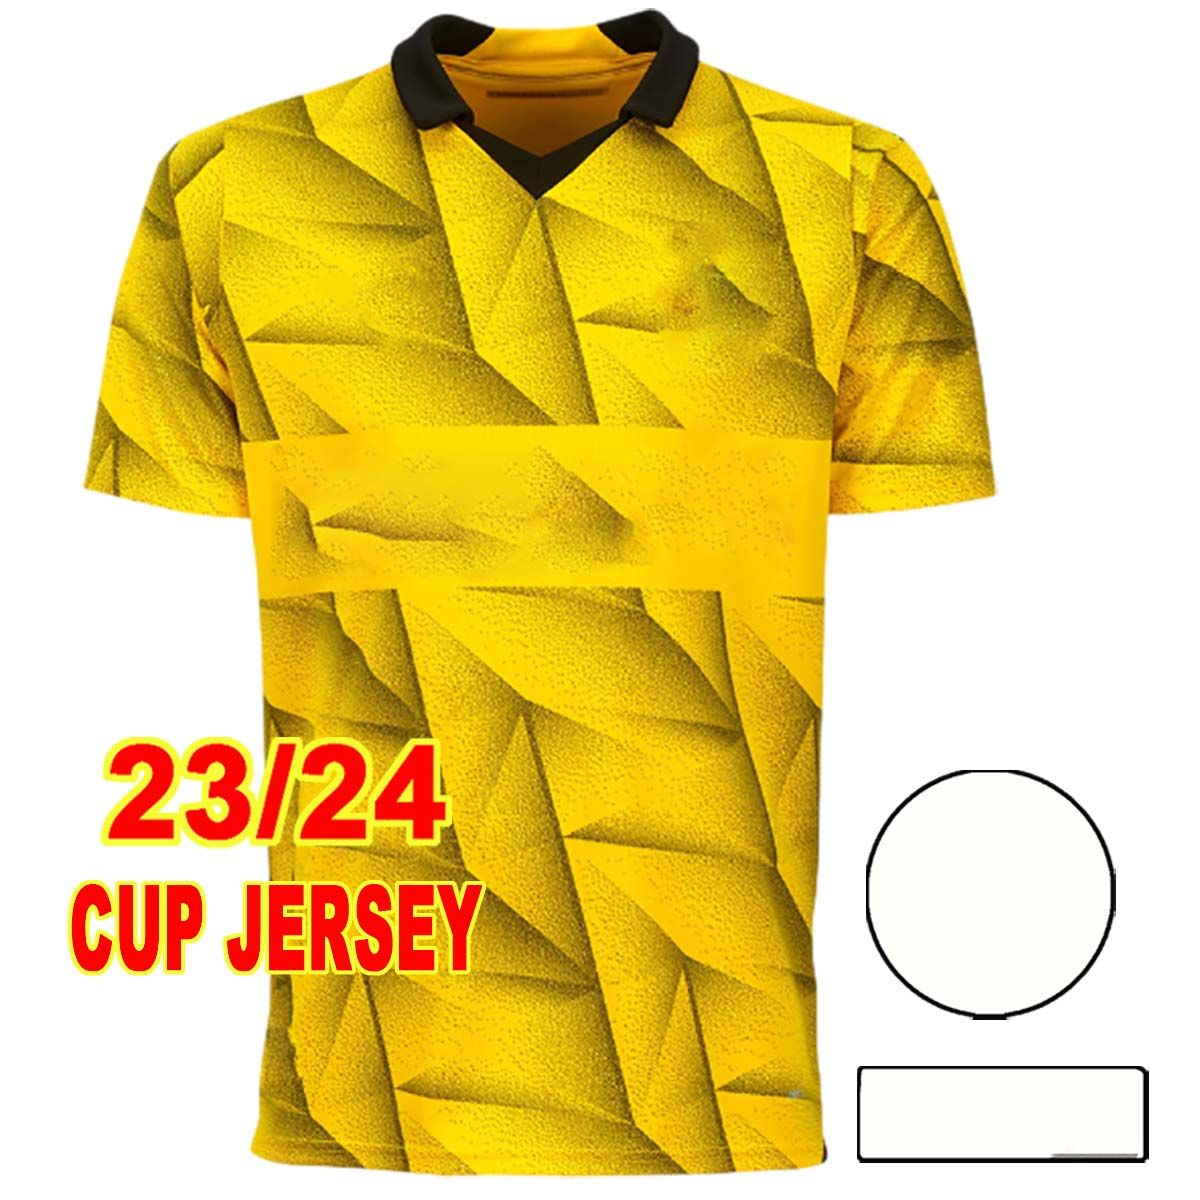 QM14772 23 24 CUP JERSEY ... patch